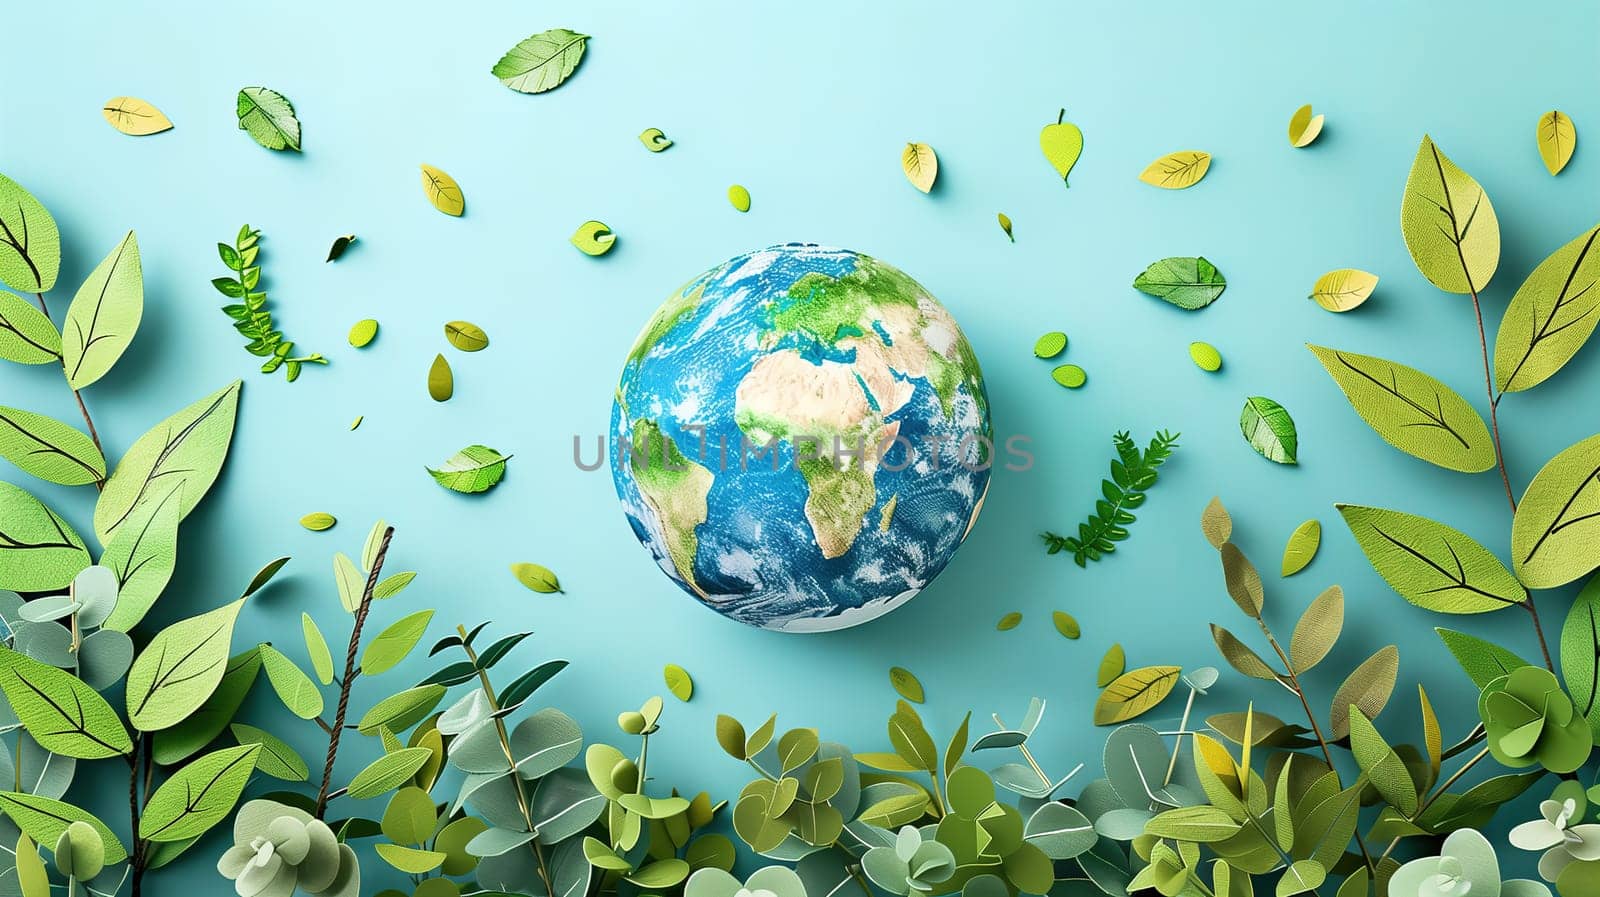 The planet Earth is depicted in the center of the image, encircled by vibrant green leaves against a calming blue backdrop. The leaves symbolize nature and the importance of environmental conservation.